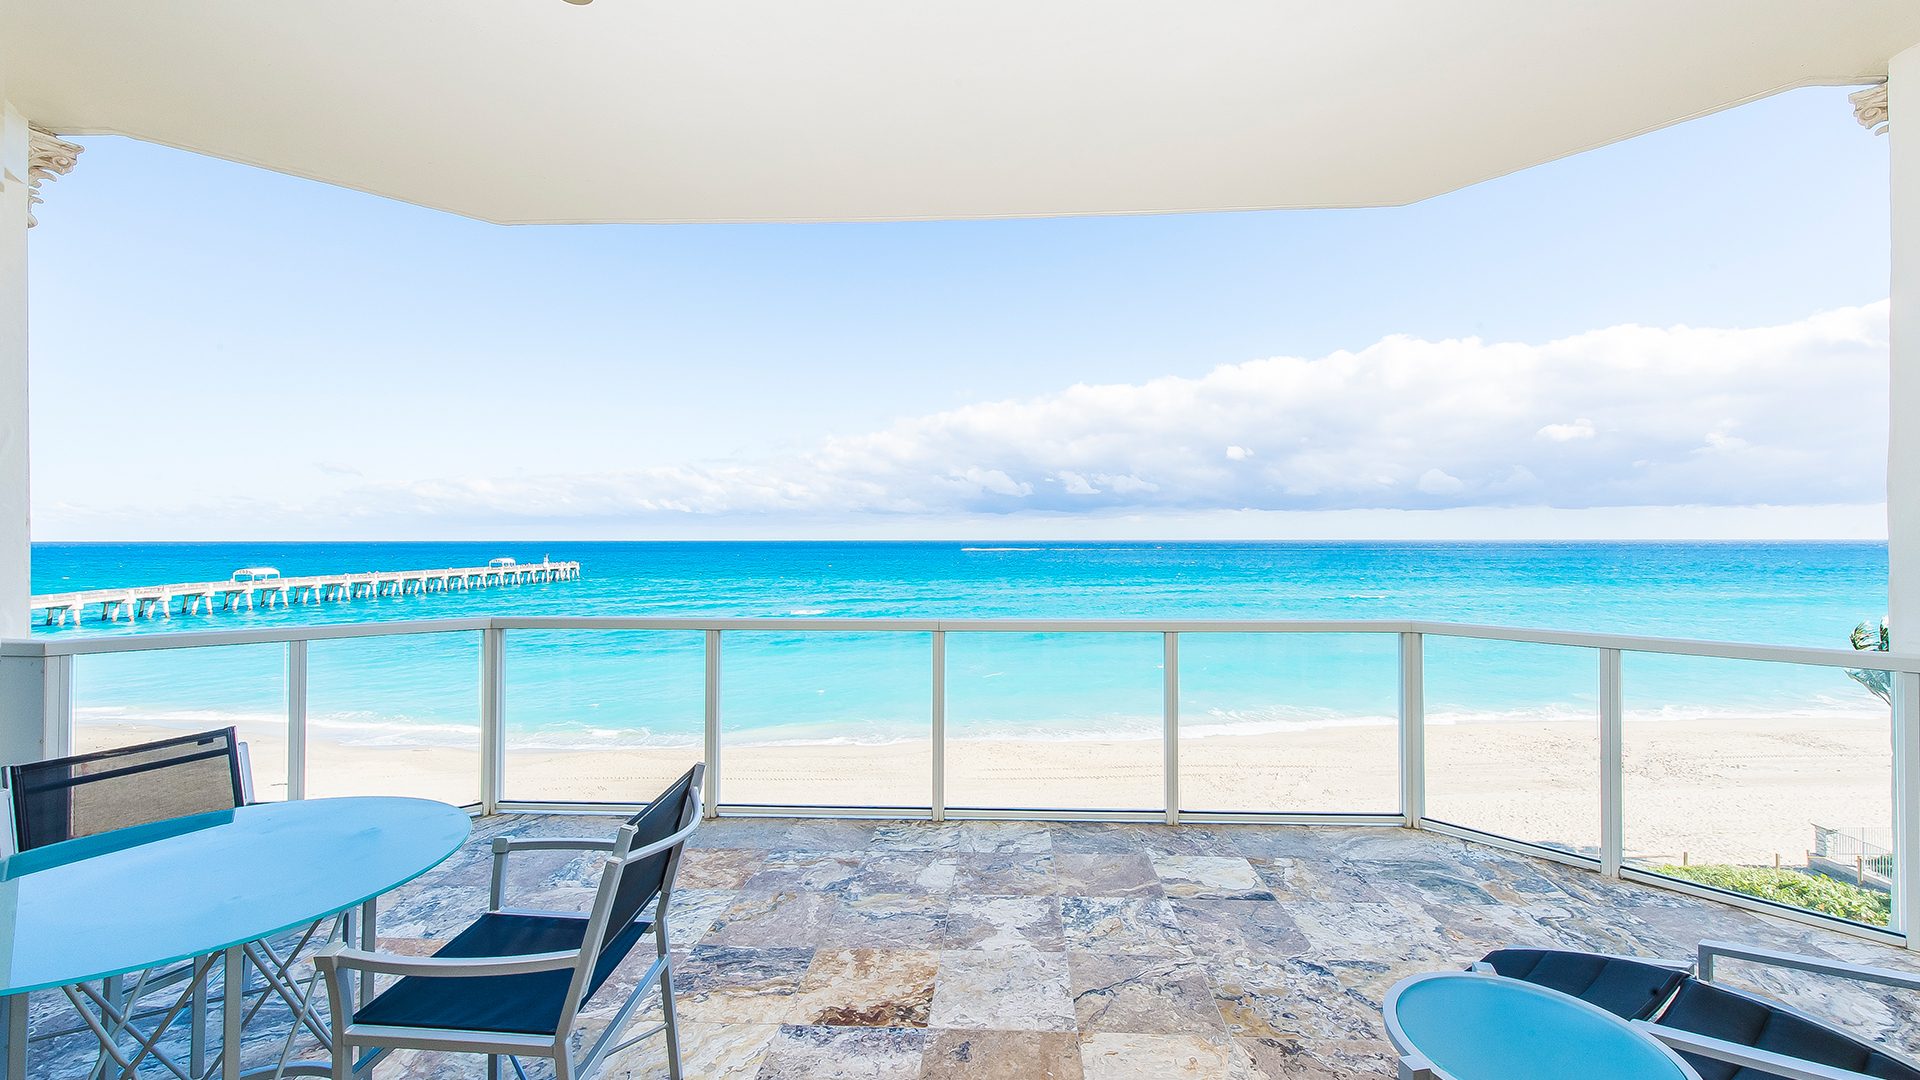 Ocean Views from Residence 507 at Bellaria, Luxury Oceanfront Condominiums in Palm Beach, Florida 33480.